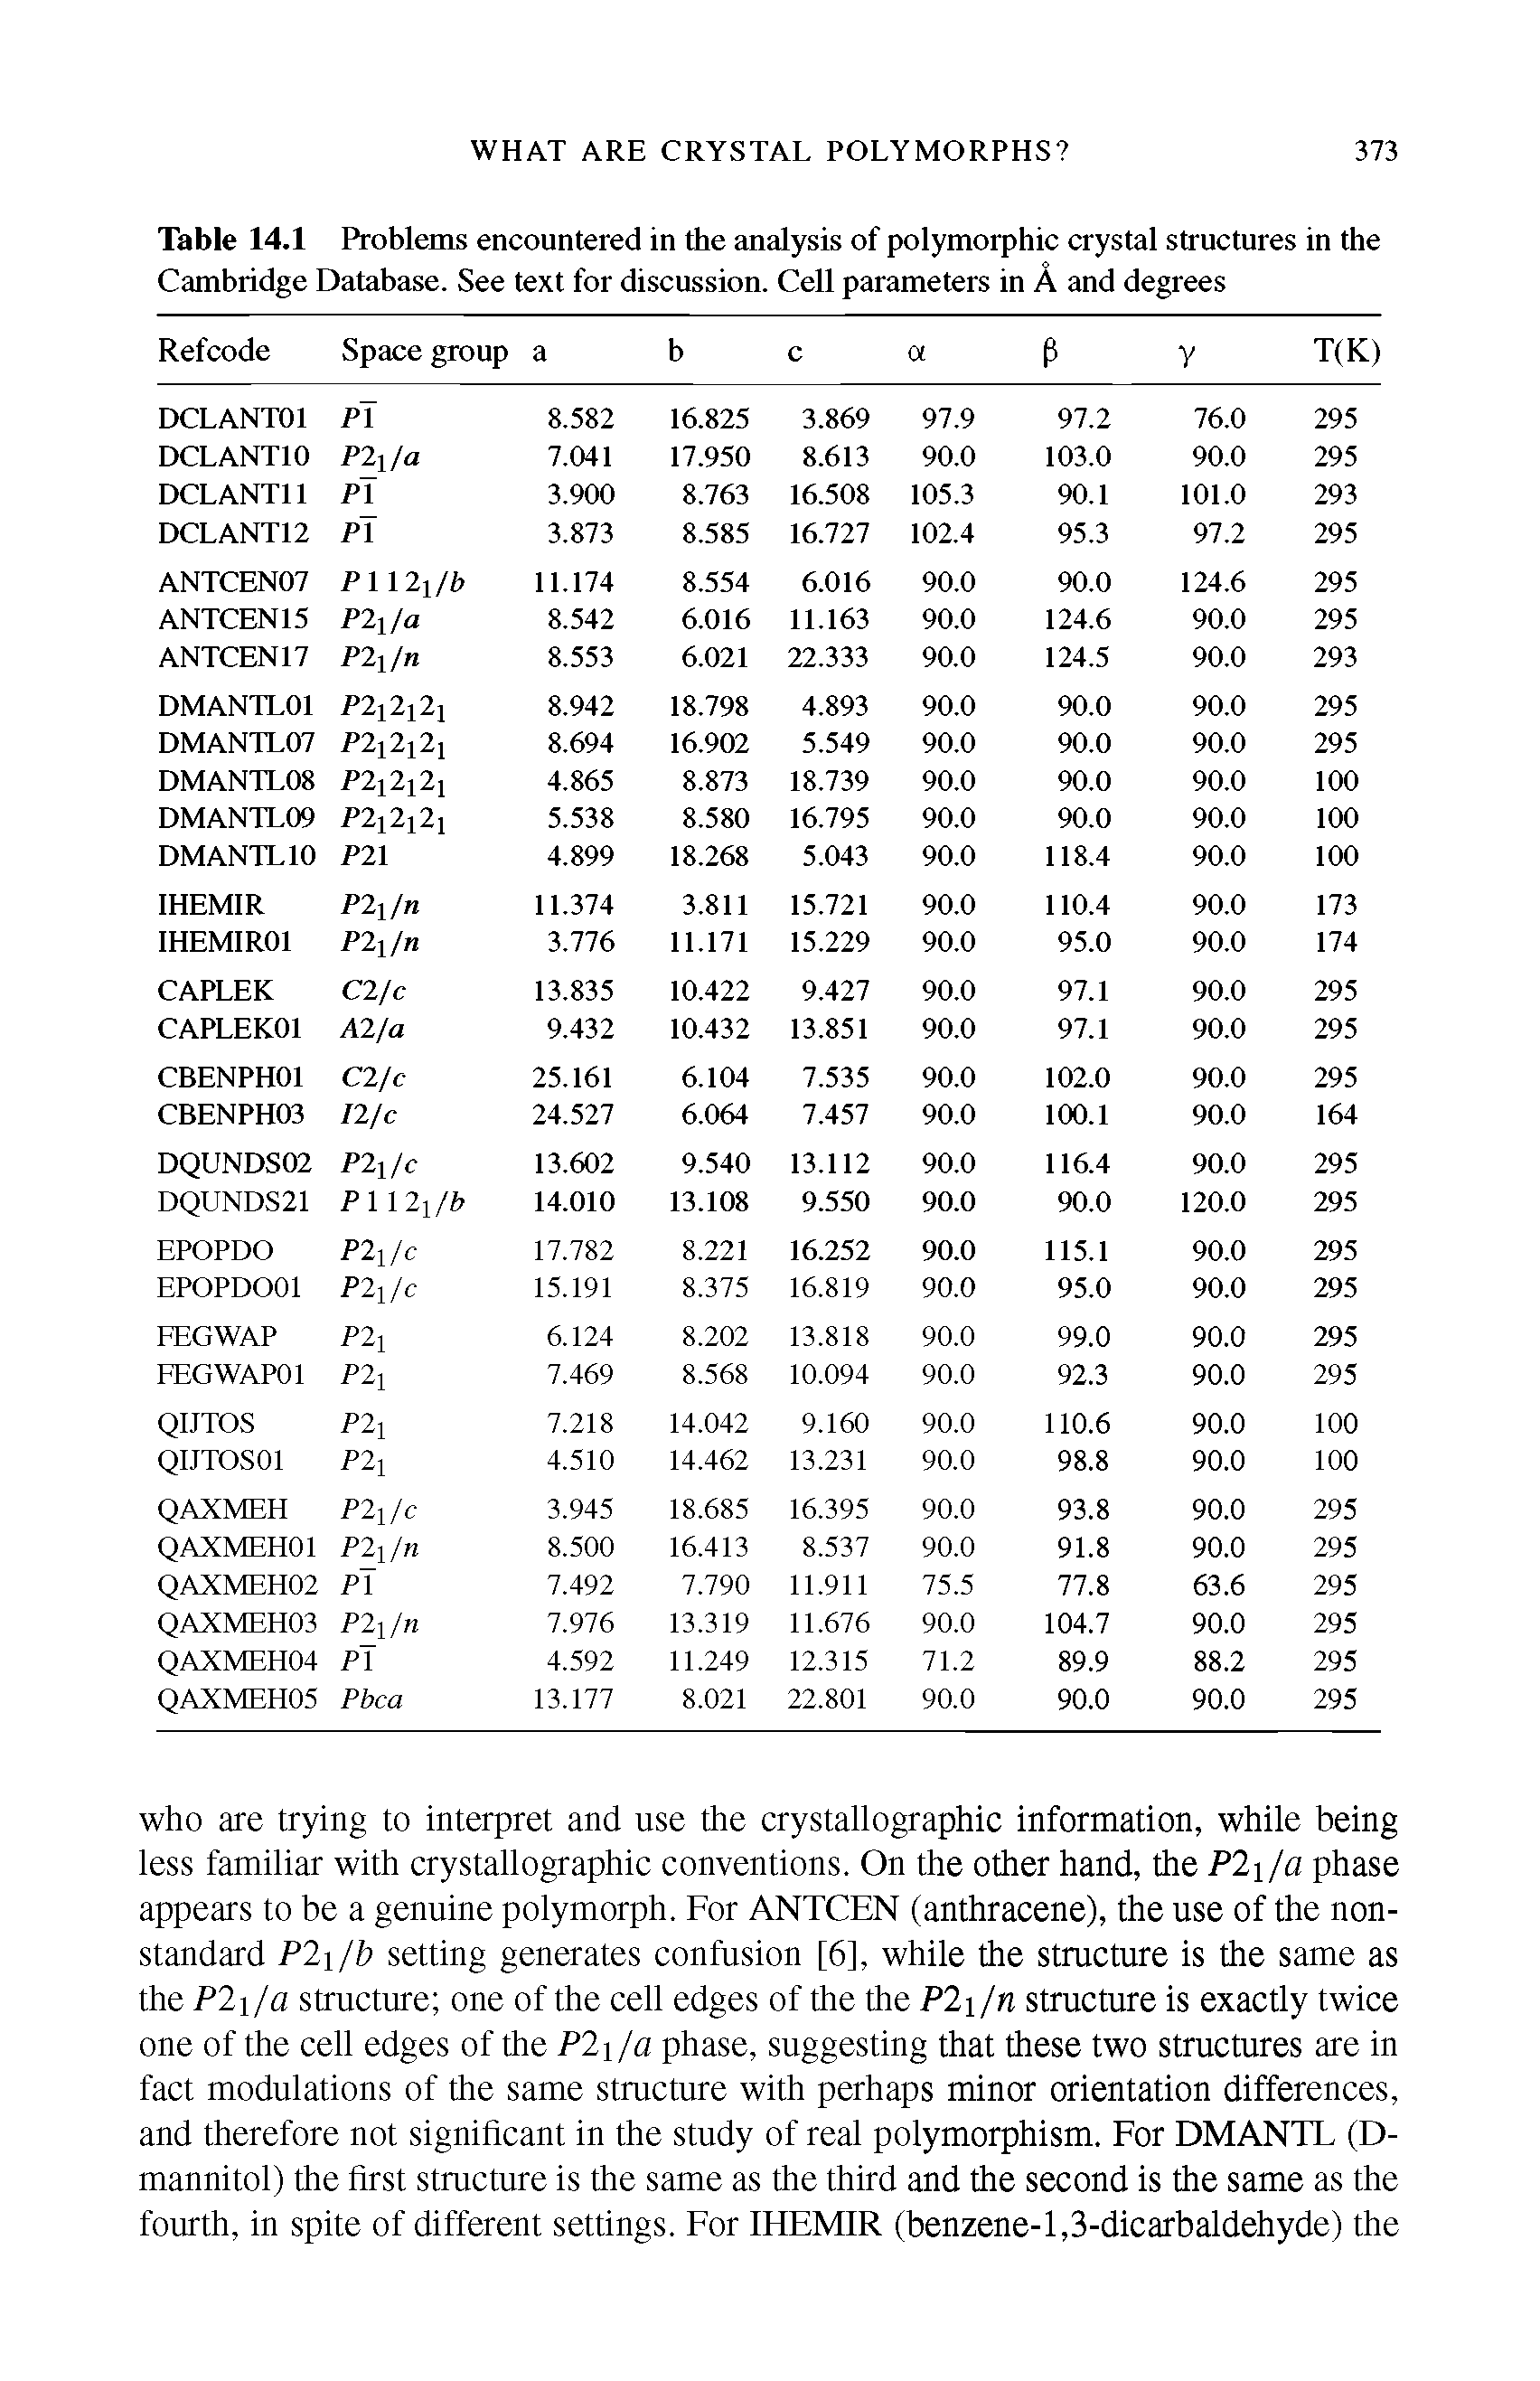 Table 14.1 Problems encountered in the analysis of polymorphic crystal structures in the Cambridge Database. See text for discussion. Cell parameters in A and degrees...